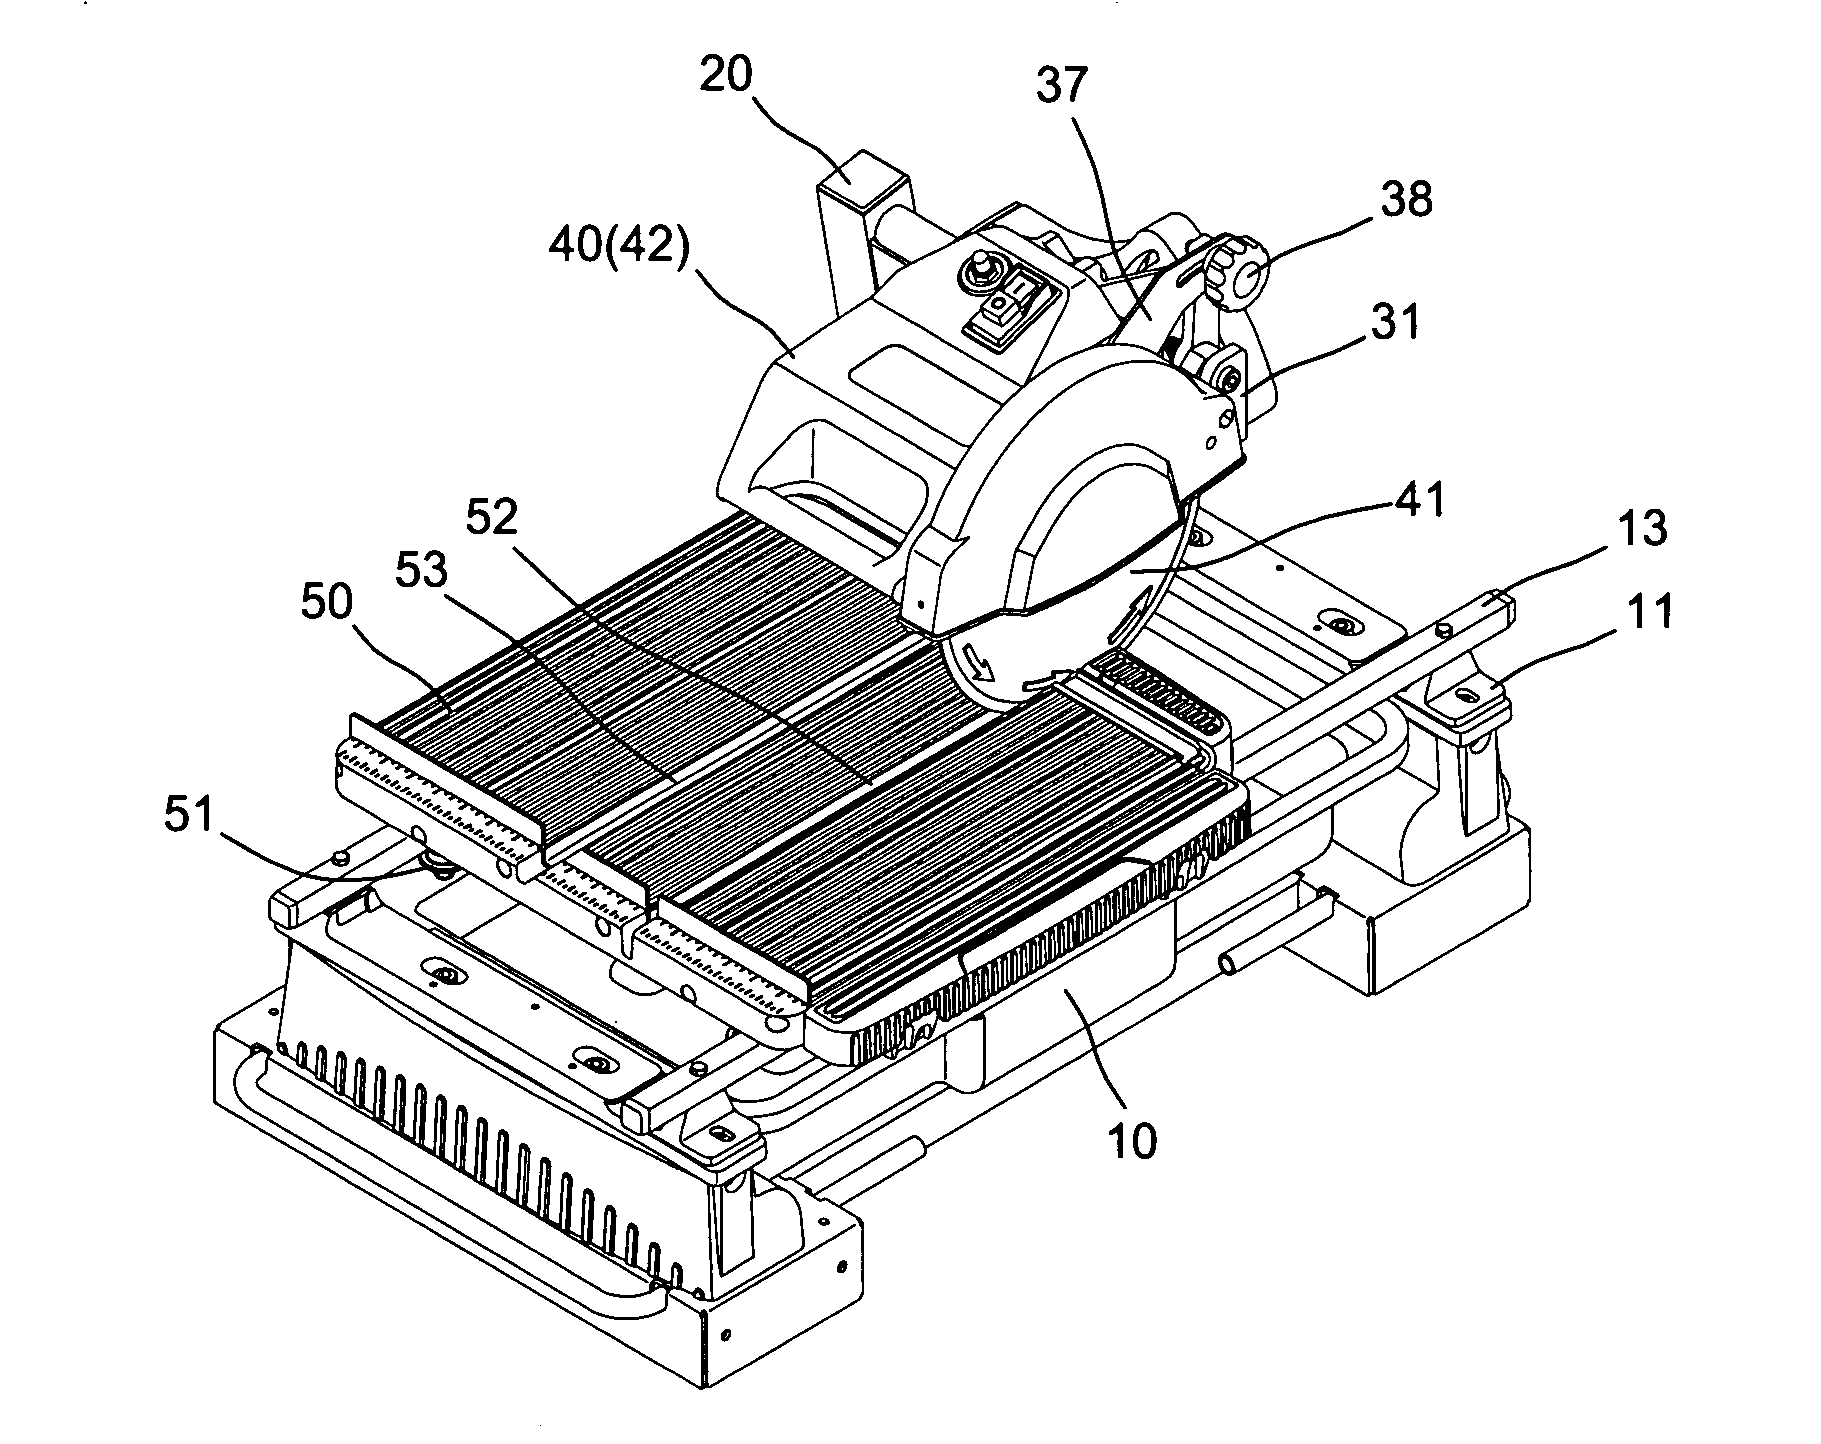 Cutting angle adjustment device for a stone cutter